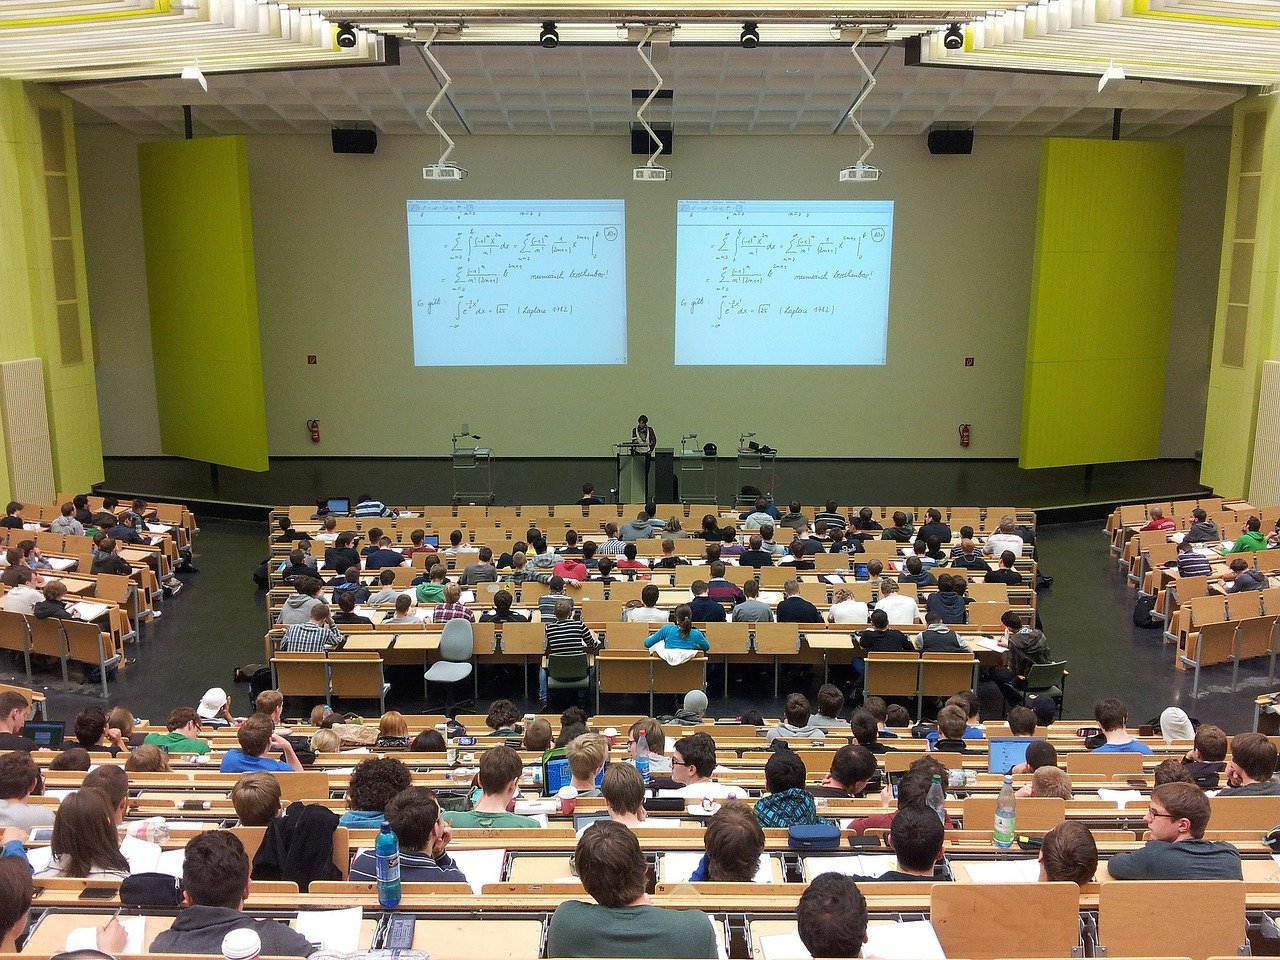 University lecture room.